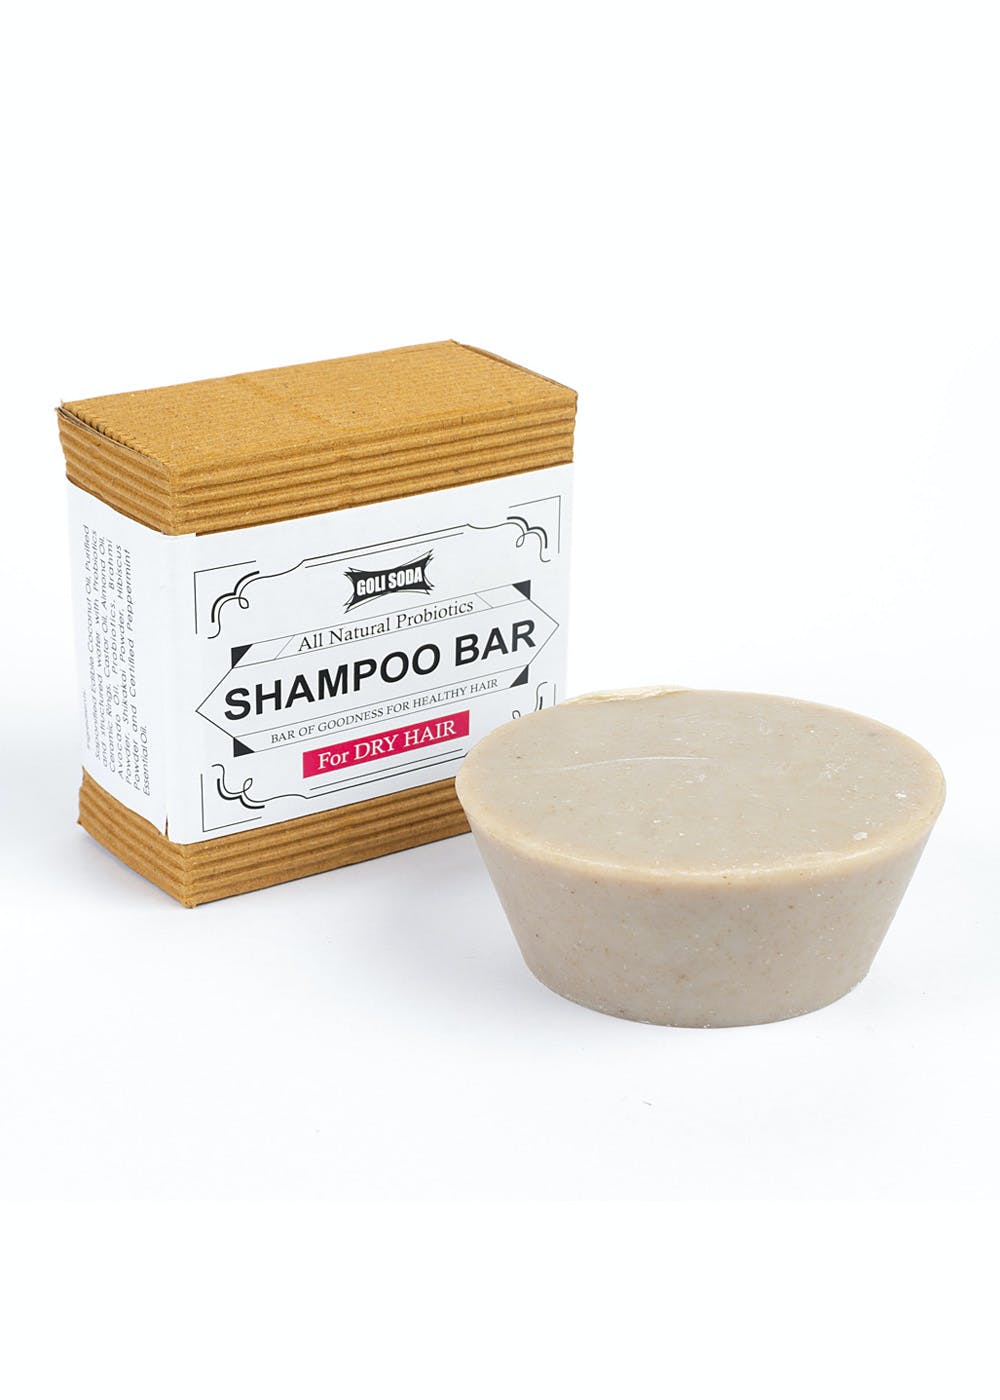 All Natural Probiotic Shampoo Bar For Dry Hair